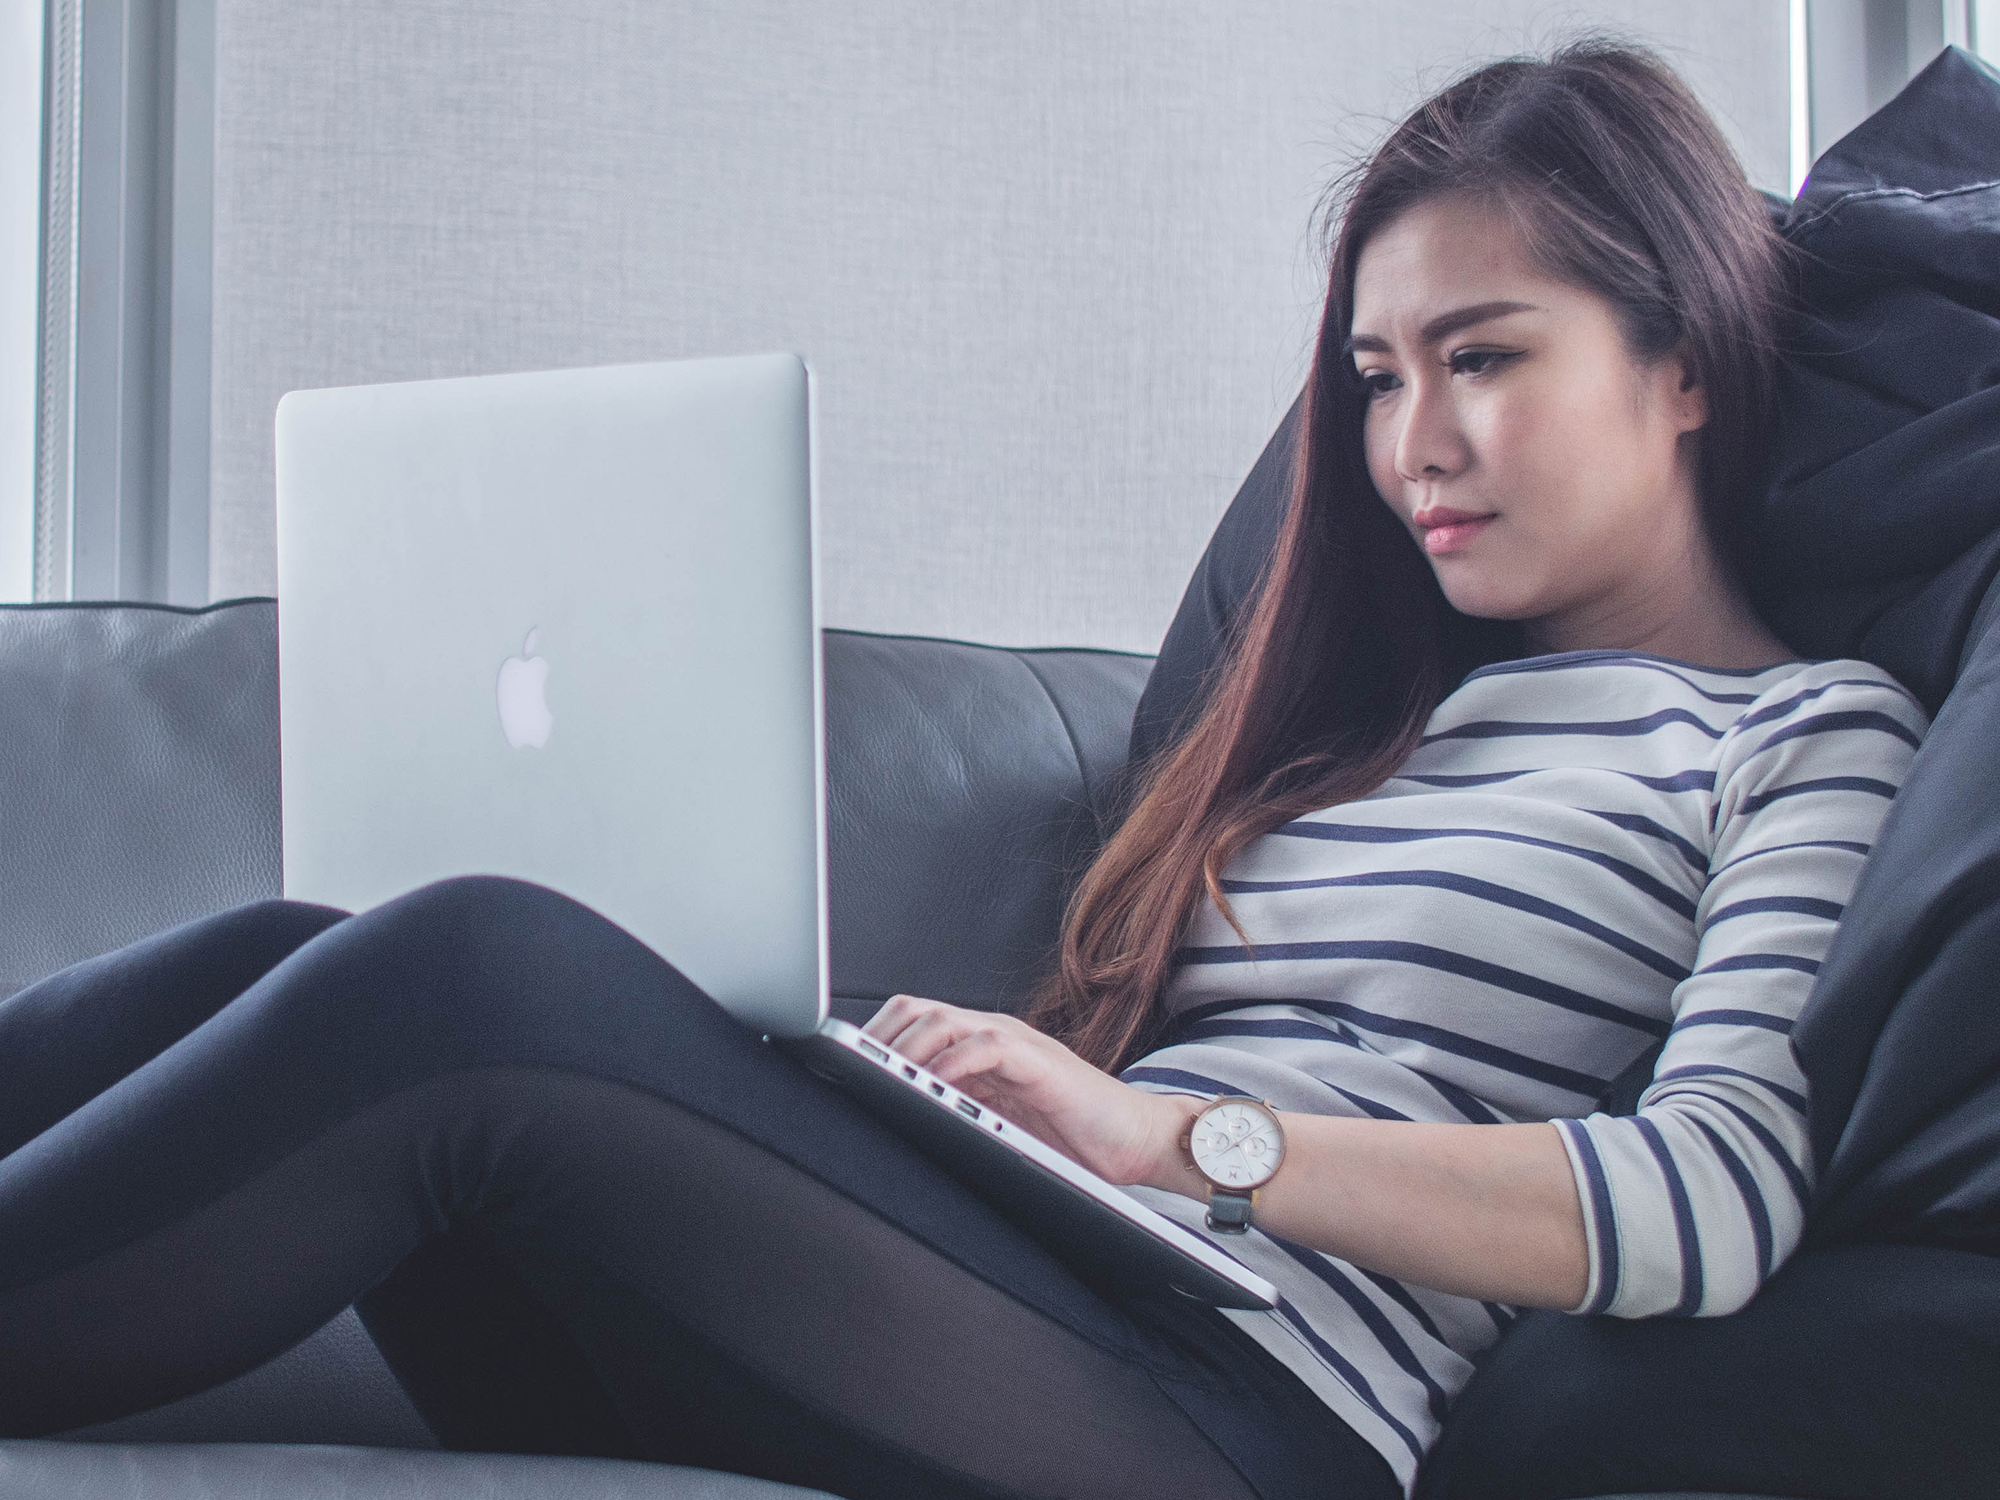 A woman lounging on a couch with a silver Macbook on her lap, possibly considering how she can create shortcuts for macOS.